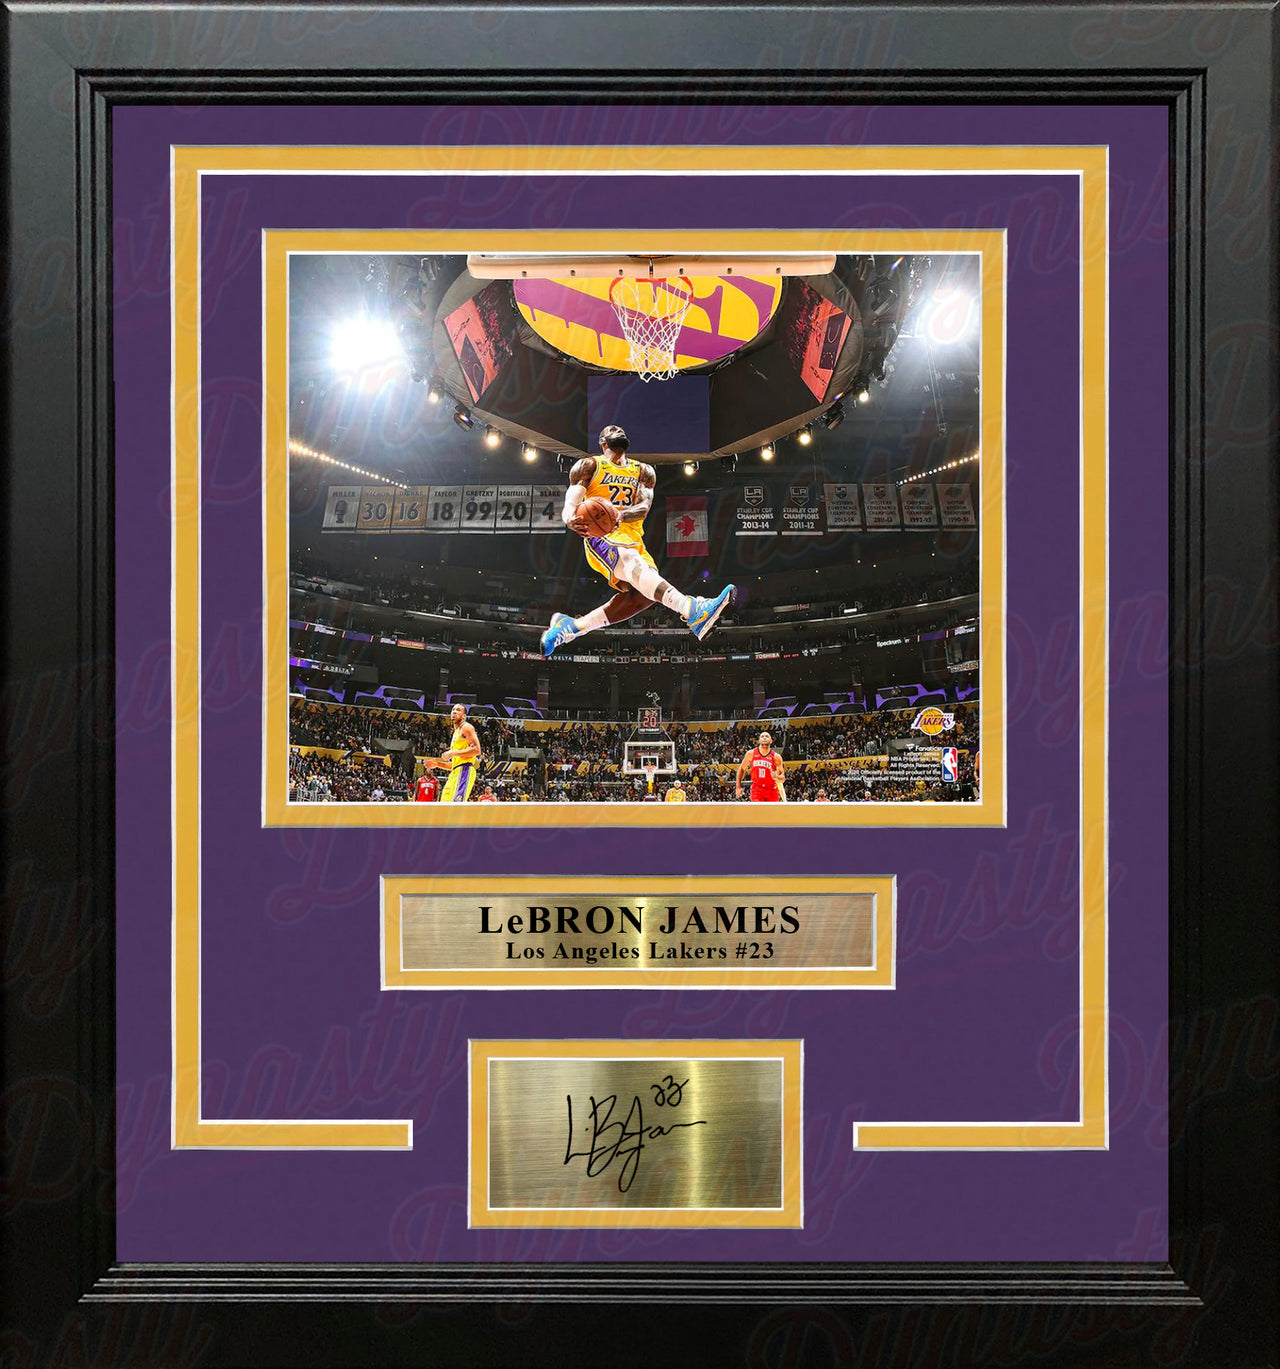 LeBron James Aerial Dunk Los Angeles Lakers 8" x 10" Framed Basketball Photo with Engraved Autograph - Dynasty Sports & Framing 